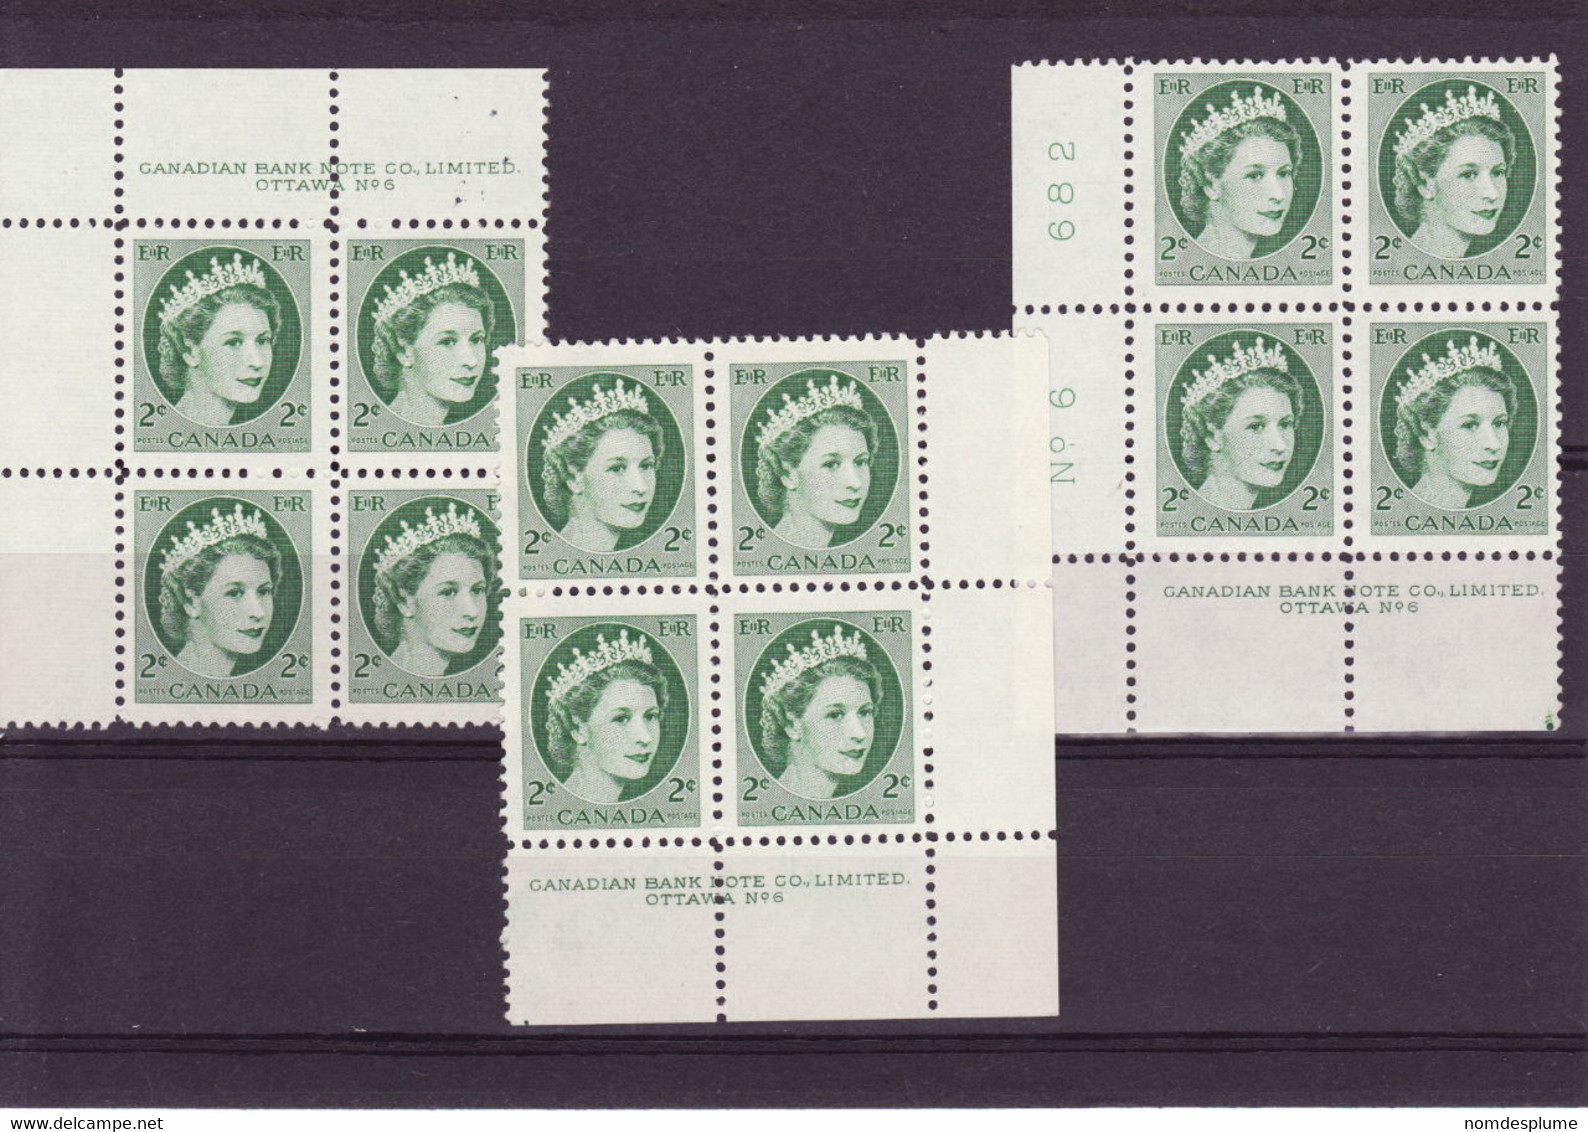 7849) Canada QE II Wilding Block Mint No Hinge Plate 6 - Num. Planches & Inscriptions Marge